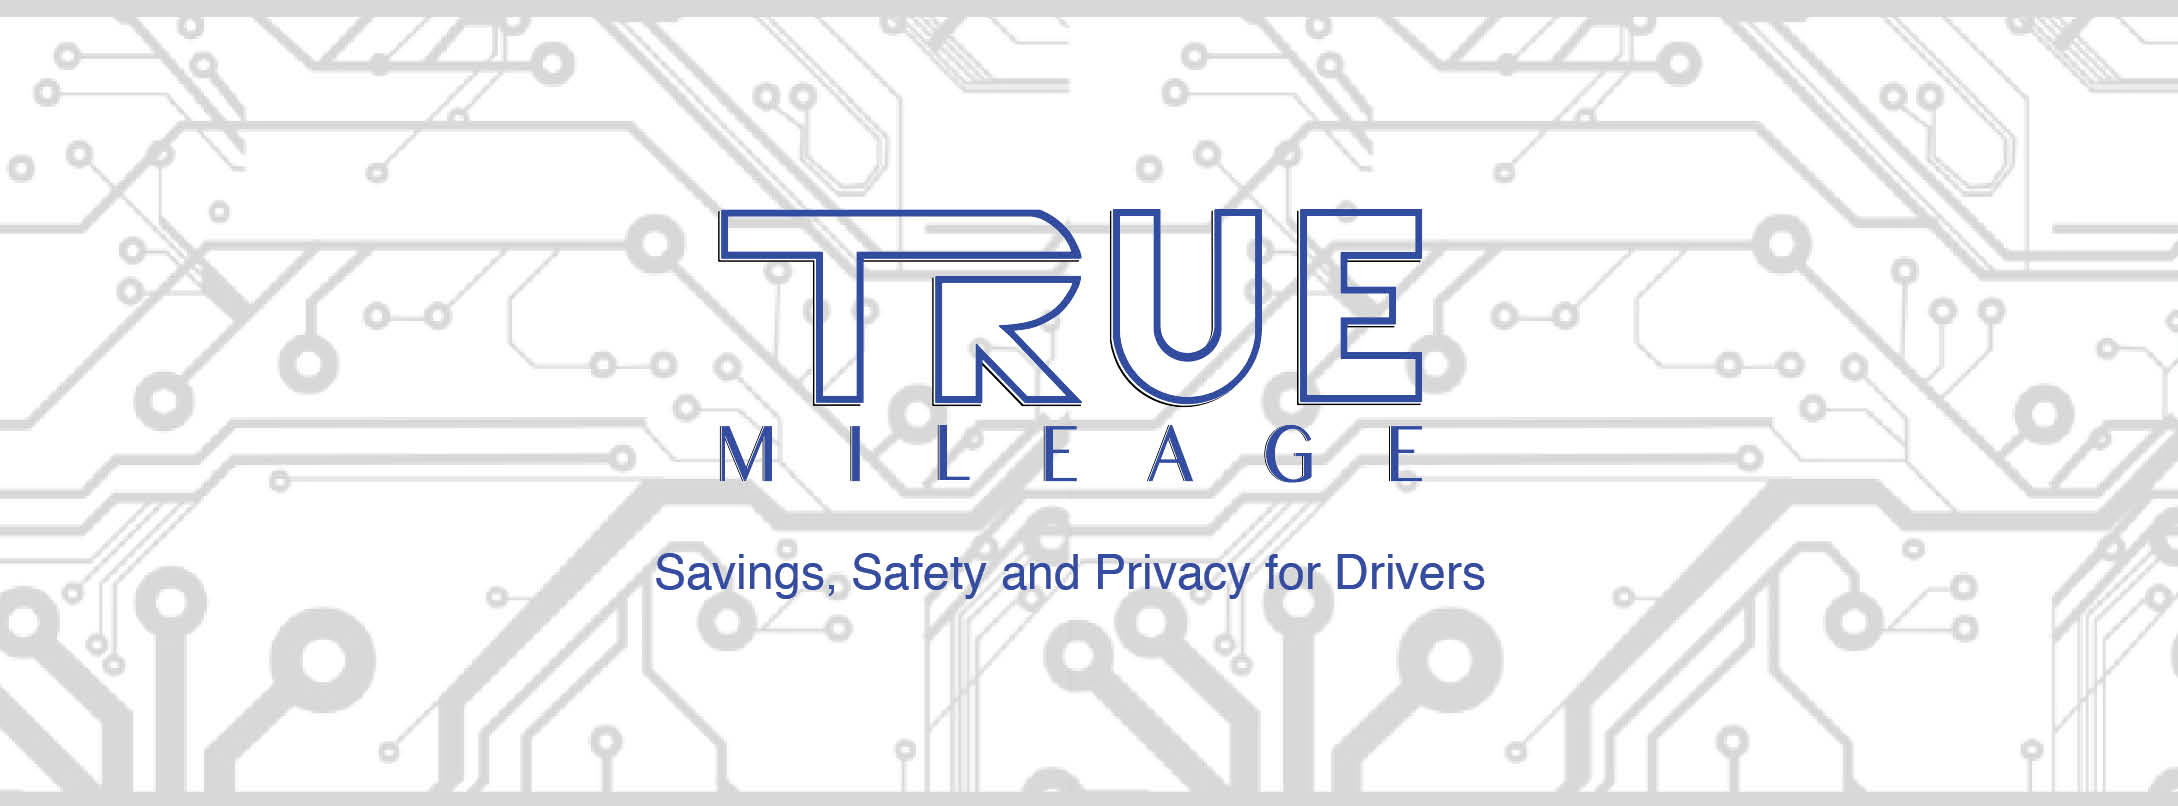 True Mileage is a Dallas-based NFC Technology Startup